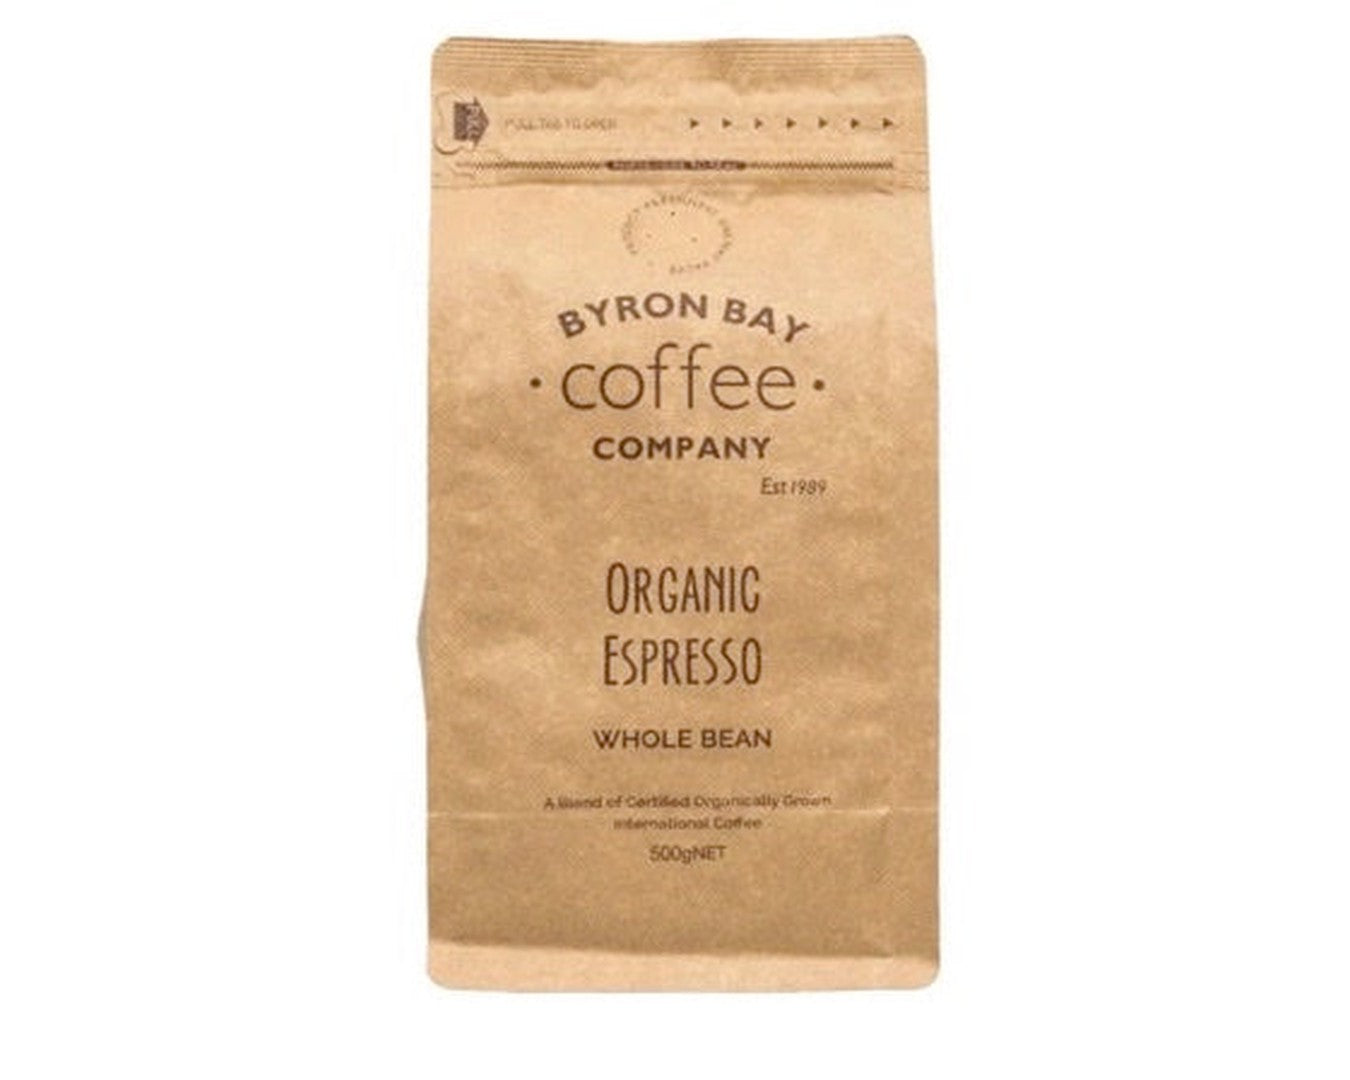 Byron Bay Coffee Co. Espresso Beans 500g-Beverages-The Local Basket